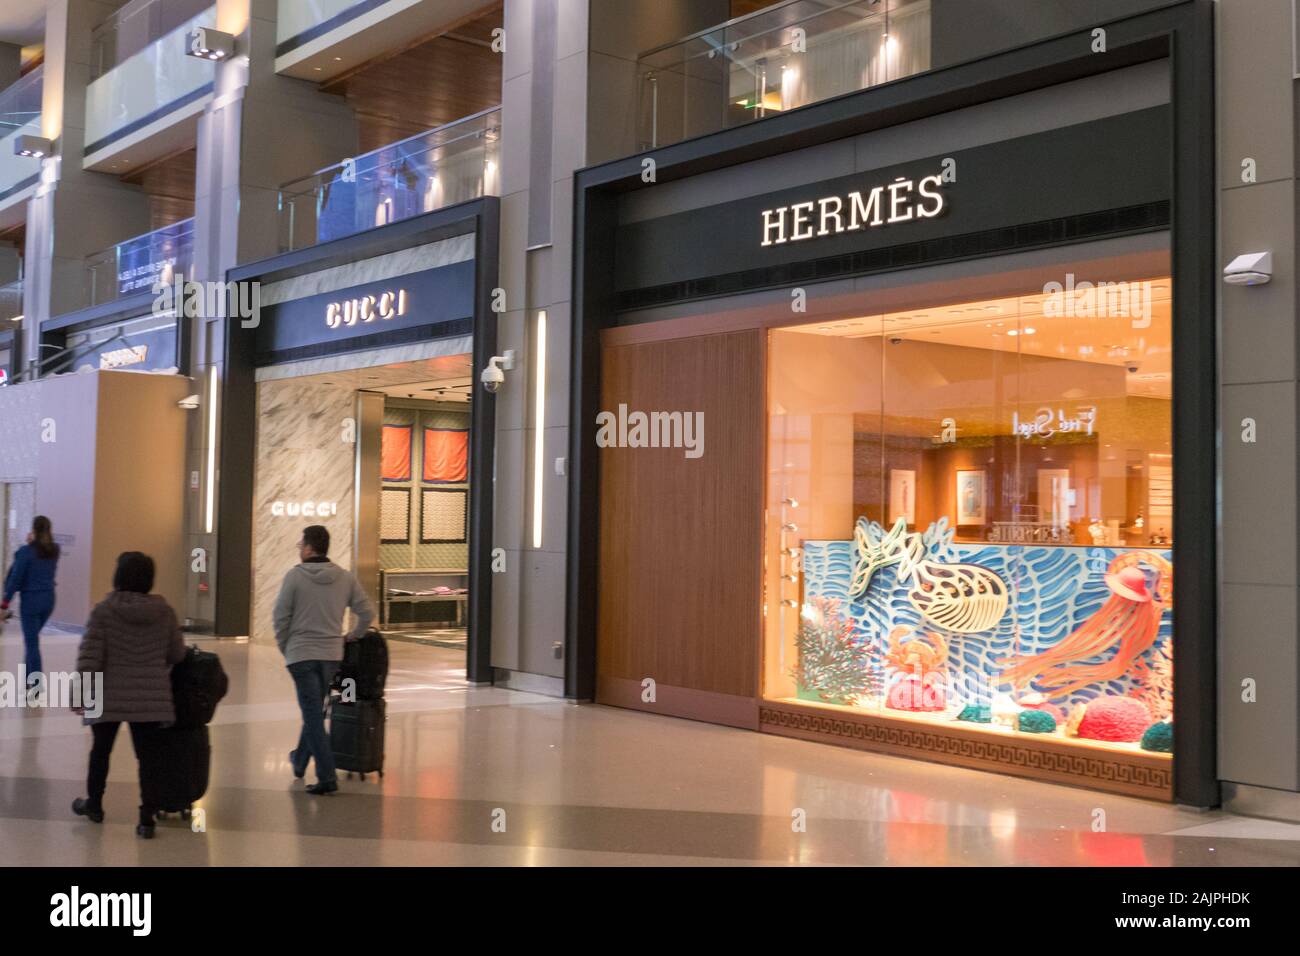 Hermes and Gucci store in LAX airport Stock Photo